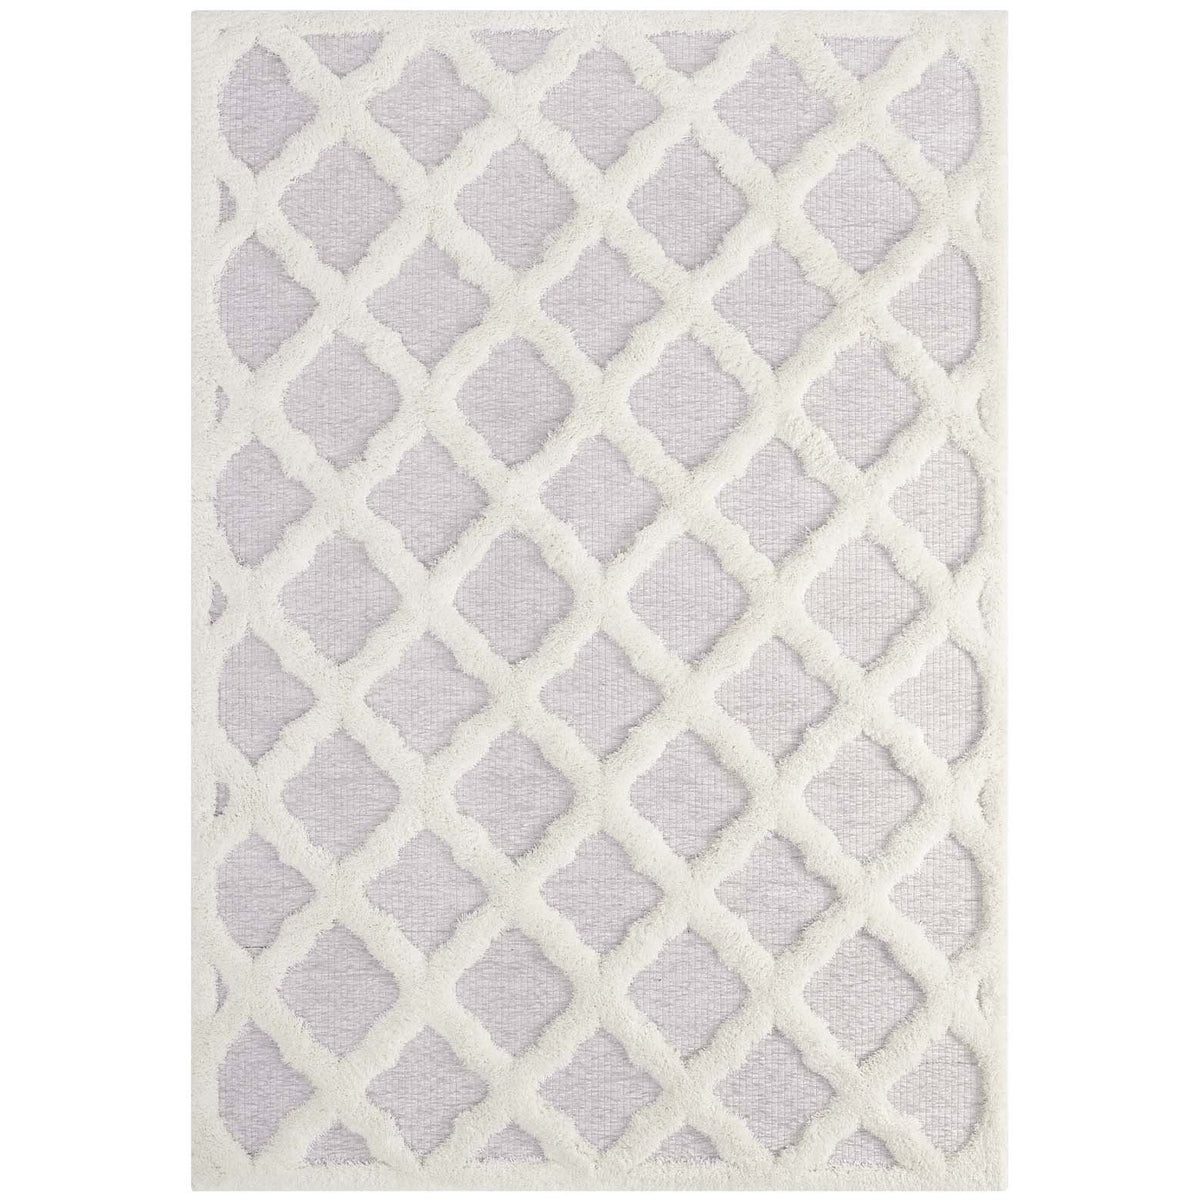 Modway Furniture Modern Regale Abstract Moroccan Trellis 8x10 Shag Area Rug - R-1154-810